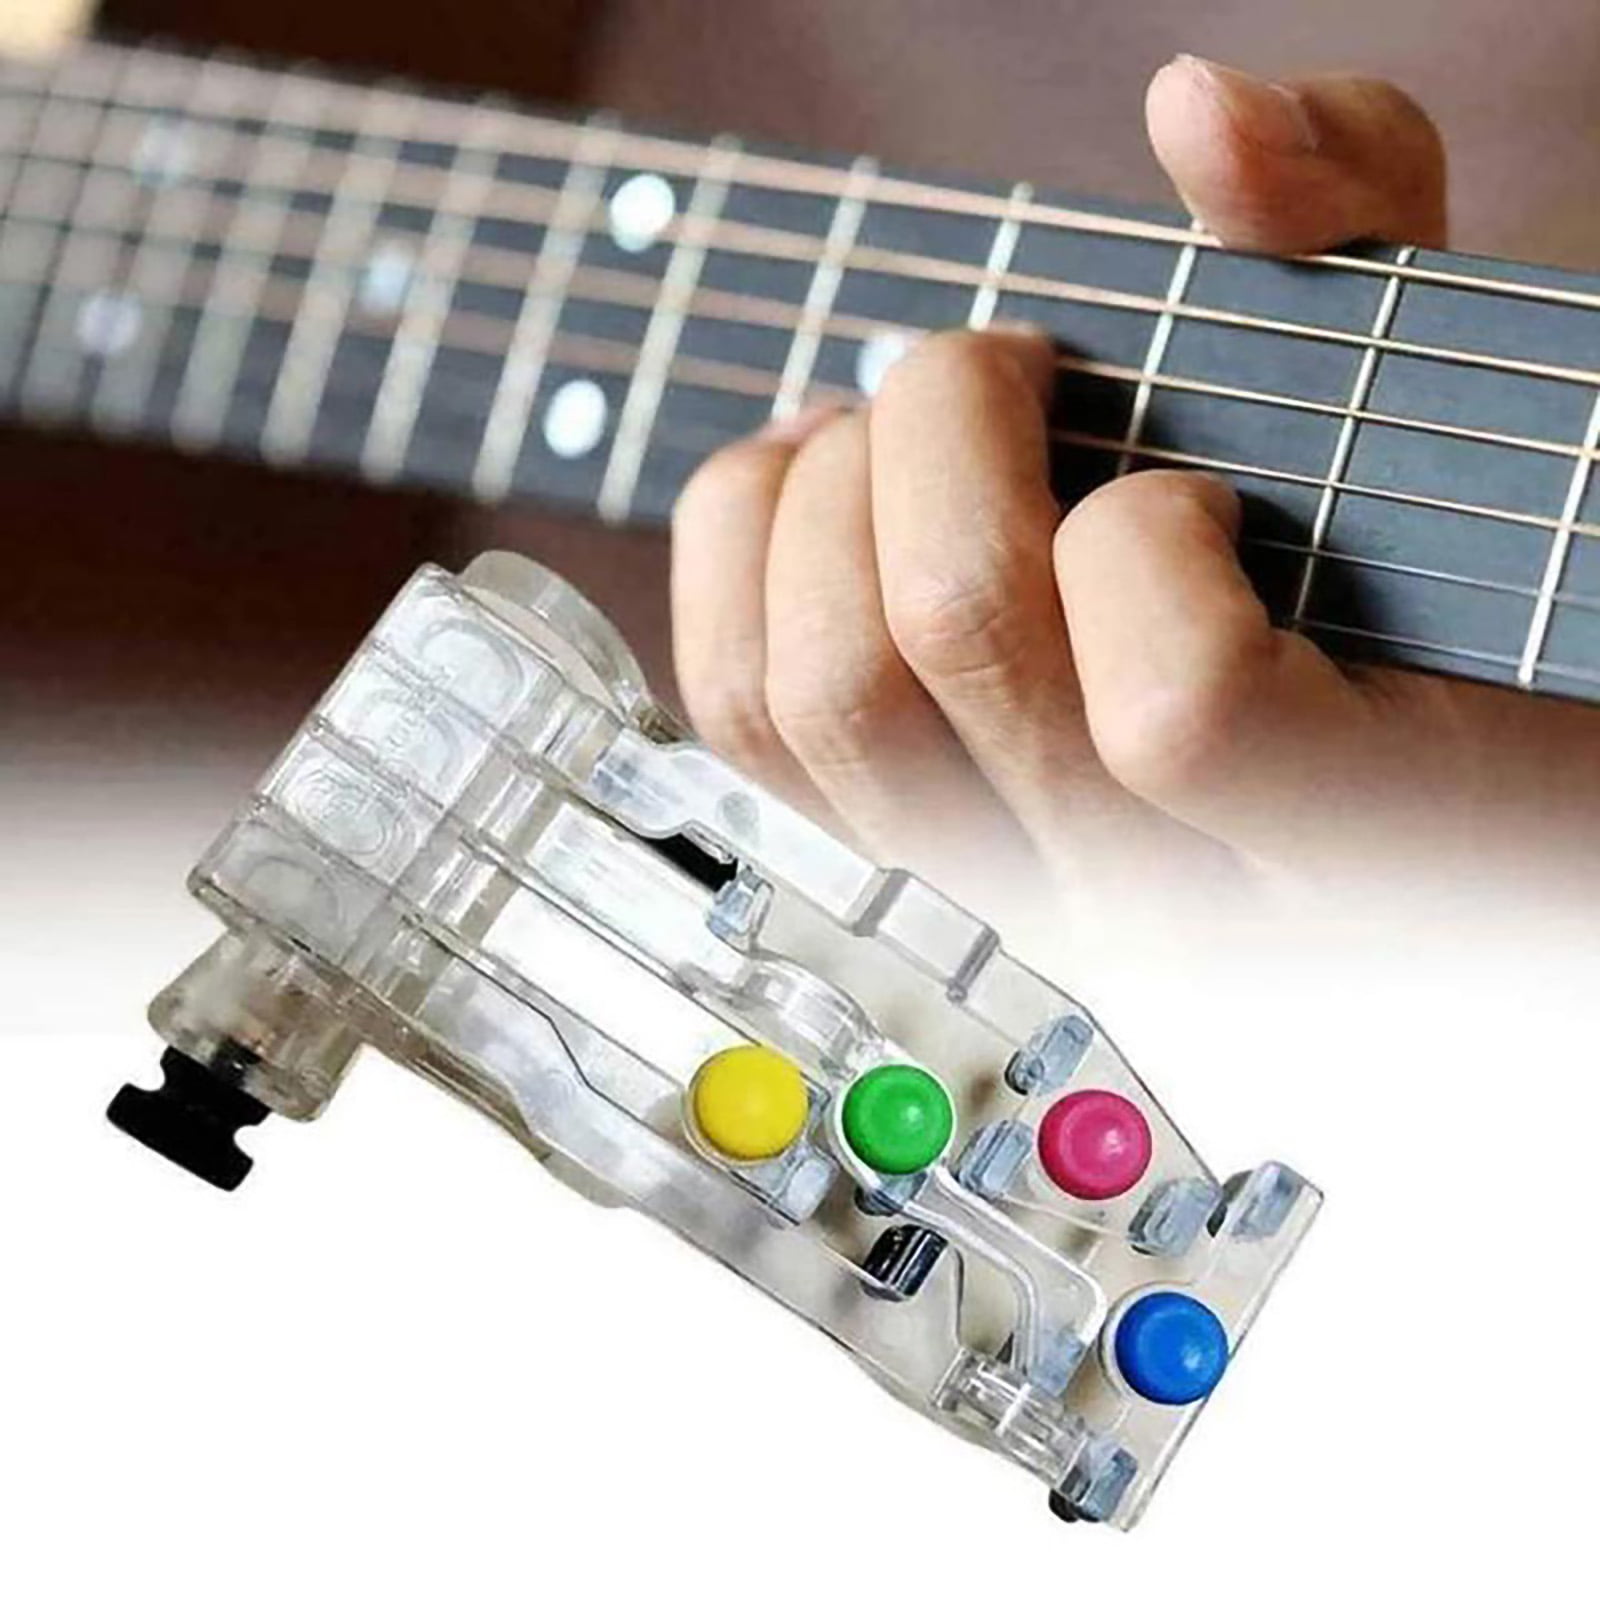 HaavPoois Guitar Teaching Aid Adjustable Classical Chord Buddy Guitar Learning System Pain-proof Fingertip Playing Guitar Teaching Tool Device for All Ages